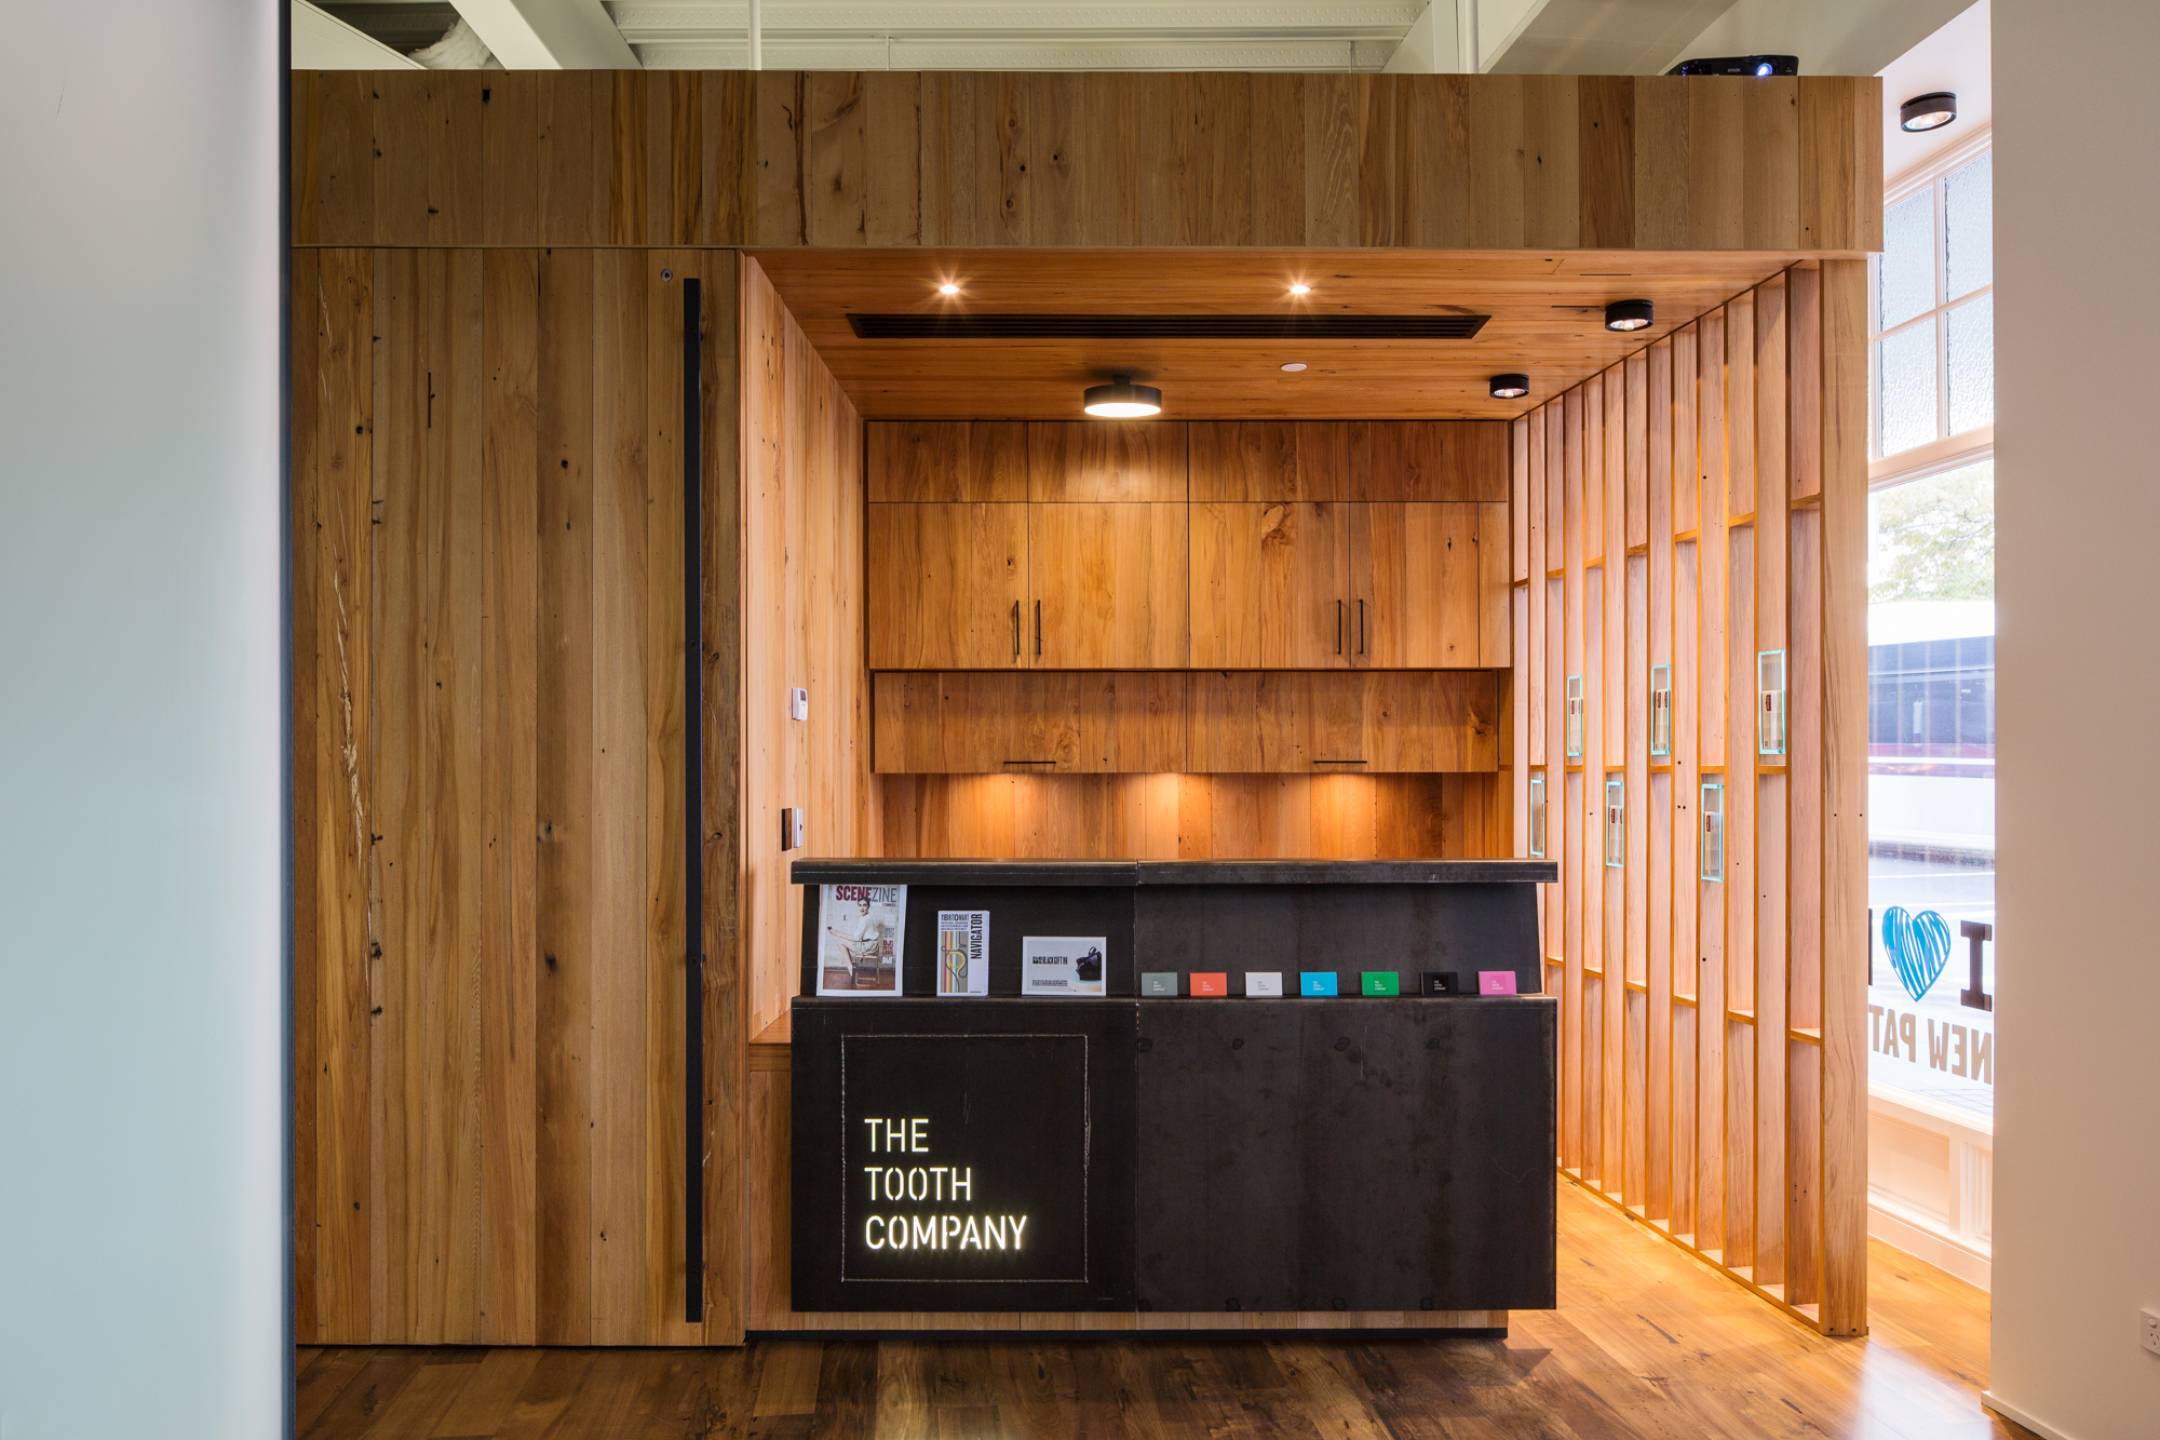 The Tooth Company by Herbst Maxcey Metropolitan Architects